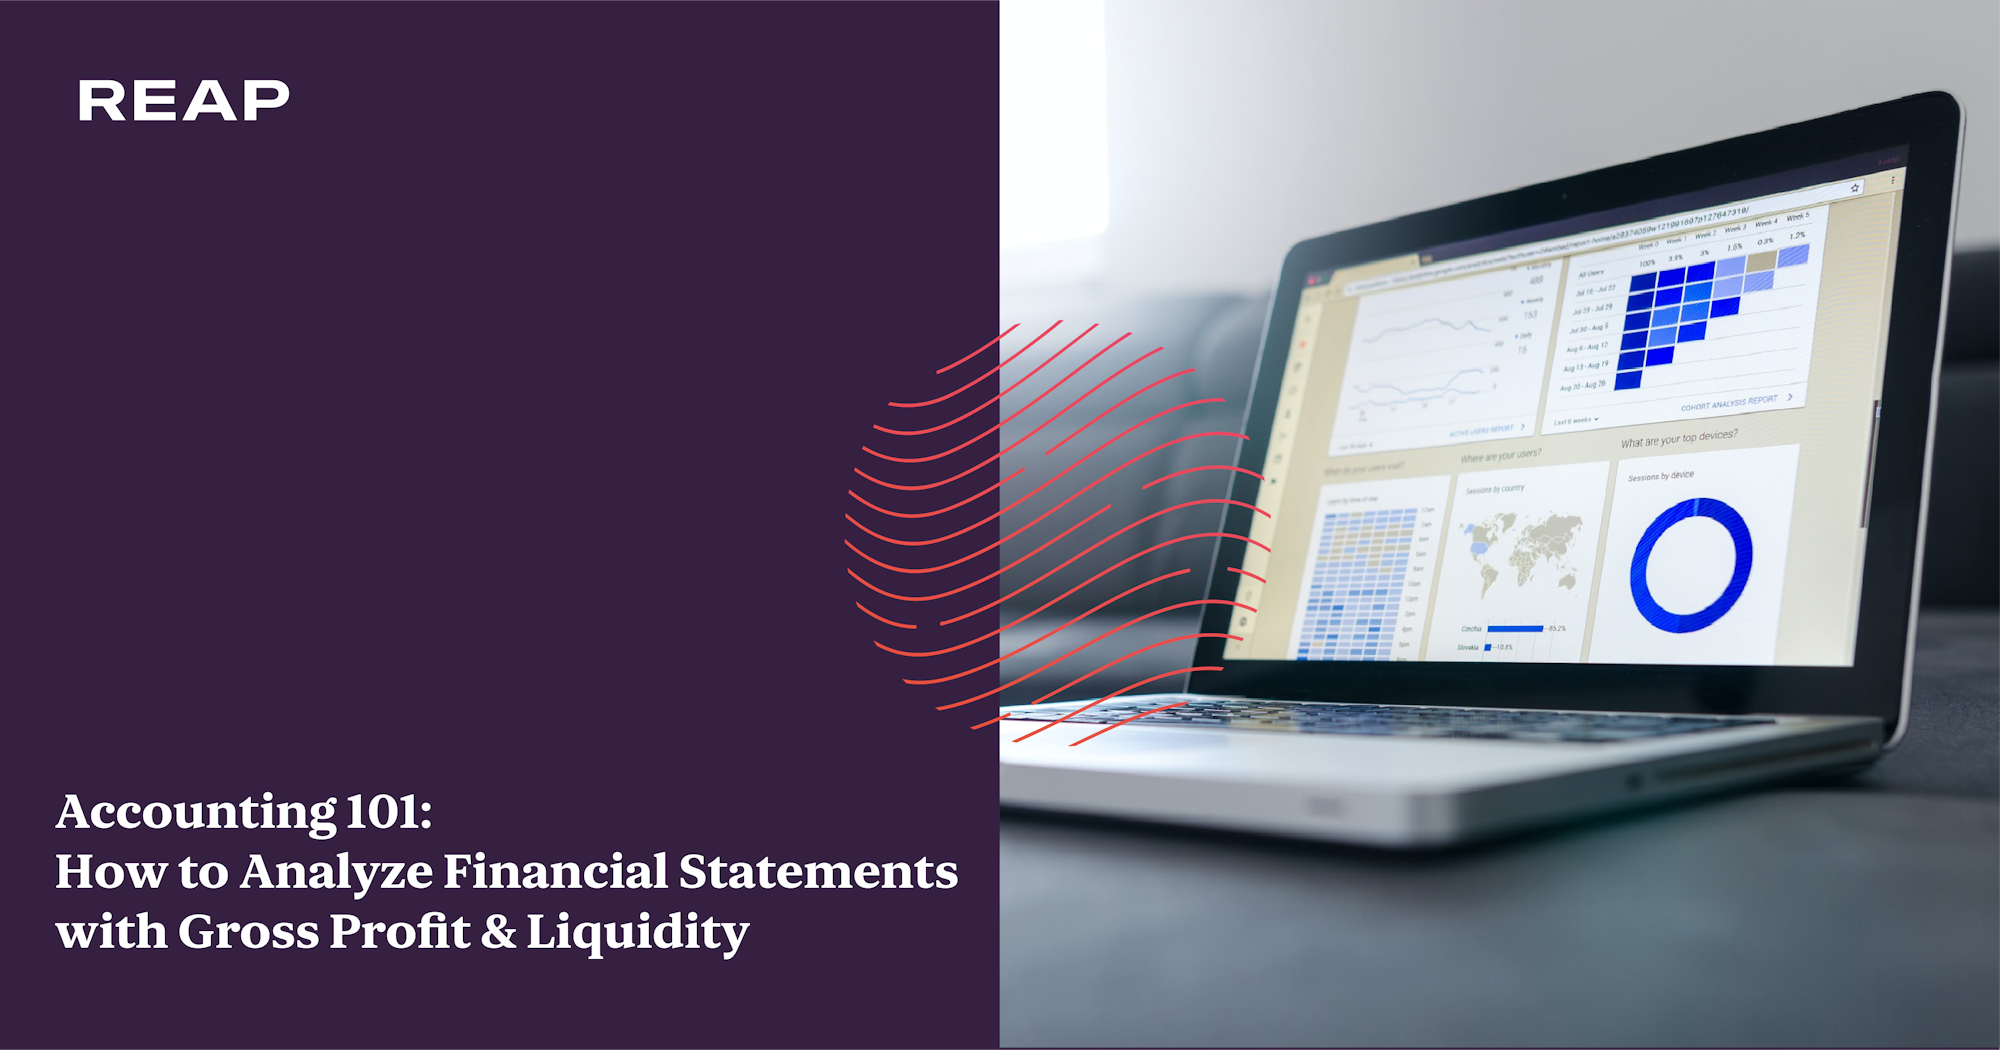 Cover Image for Accounting 101: How to Analyze Financial Statements with Gross Profit & Liquidity